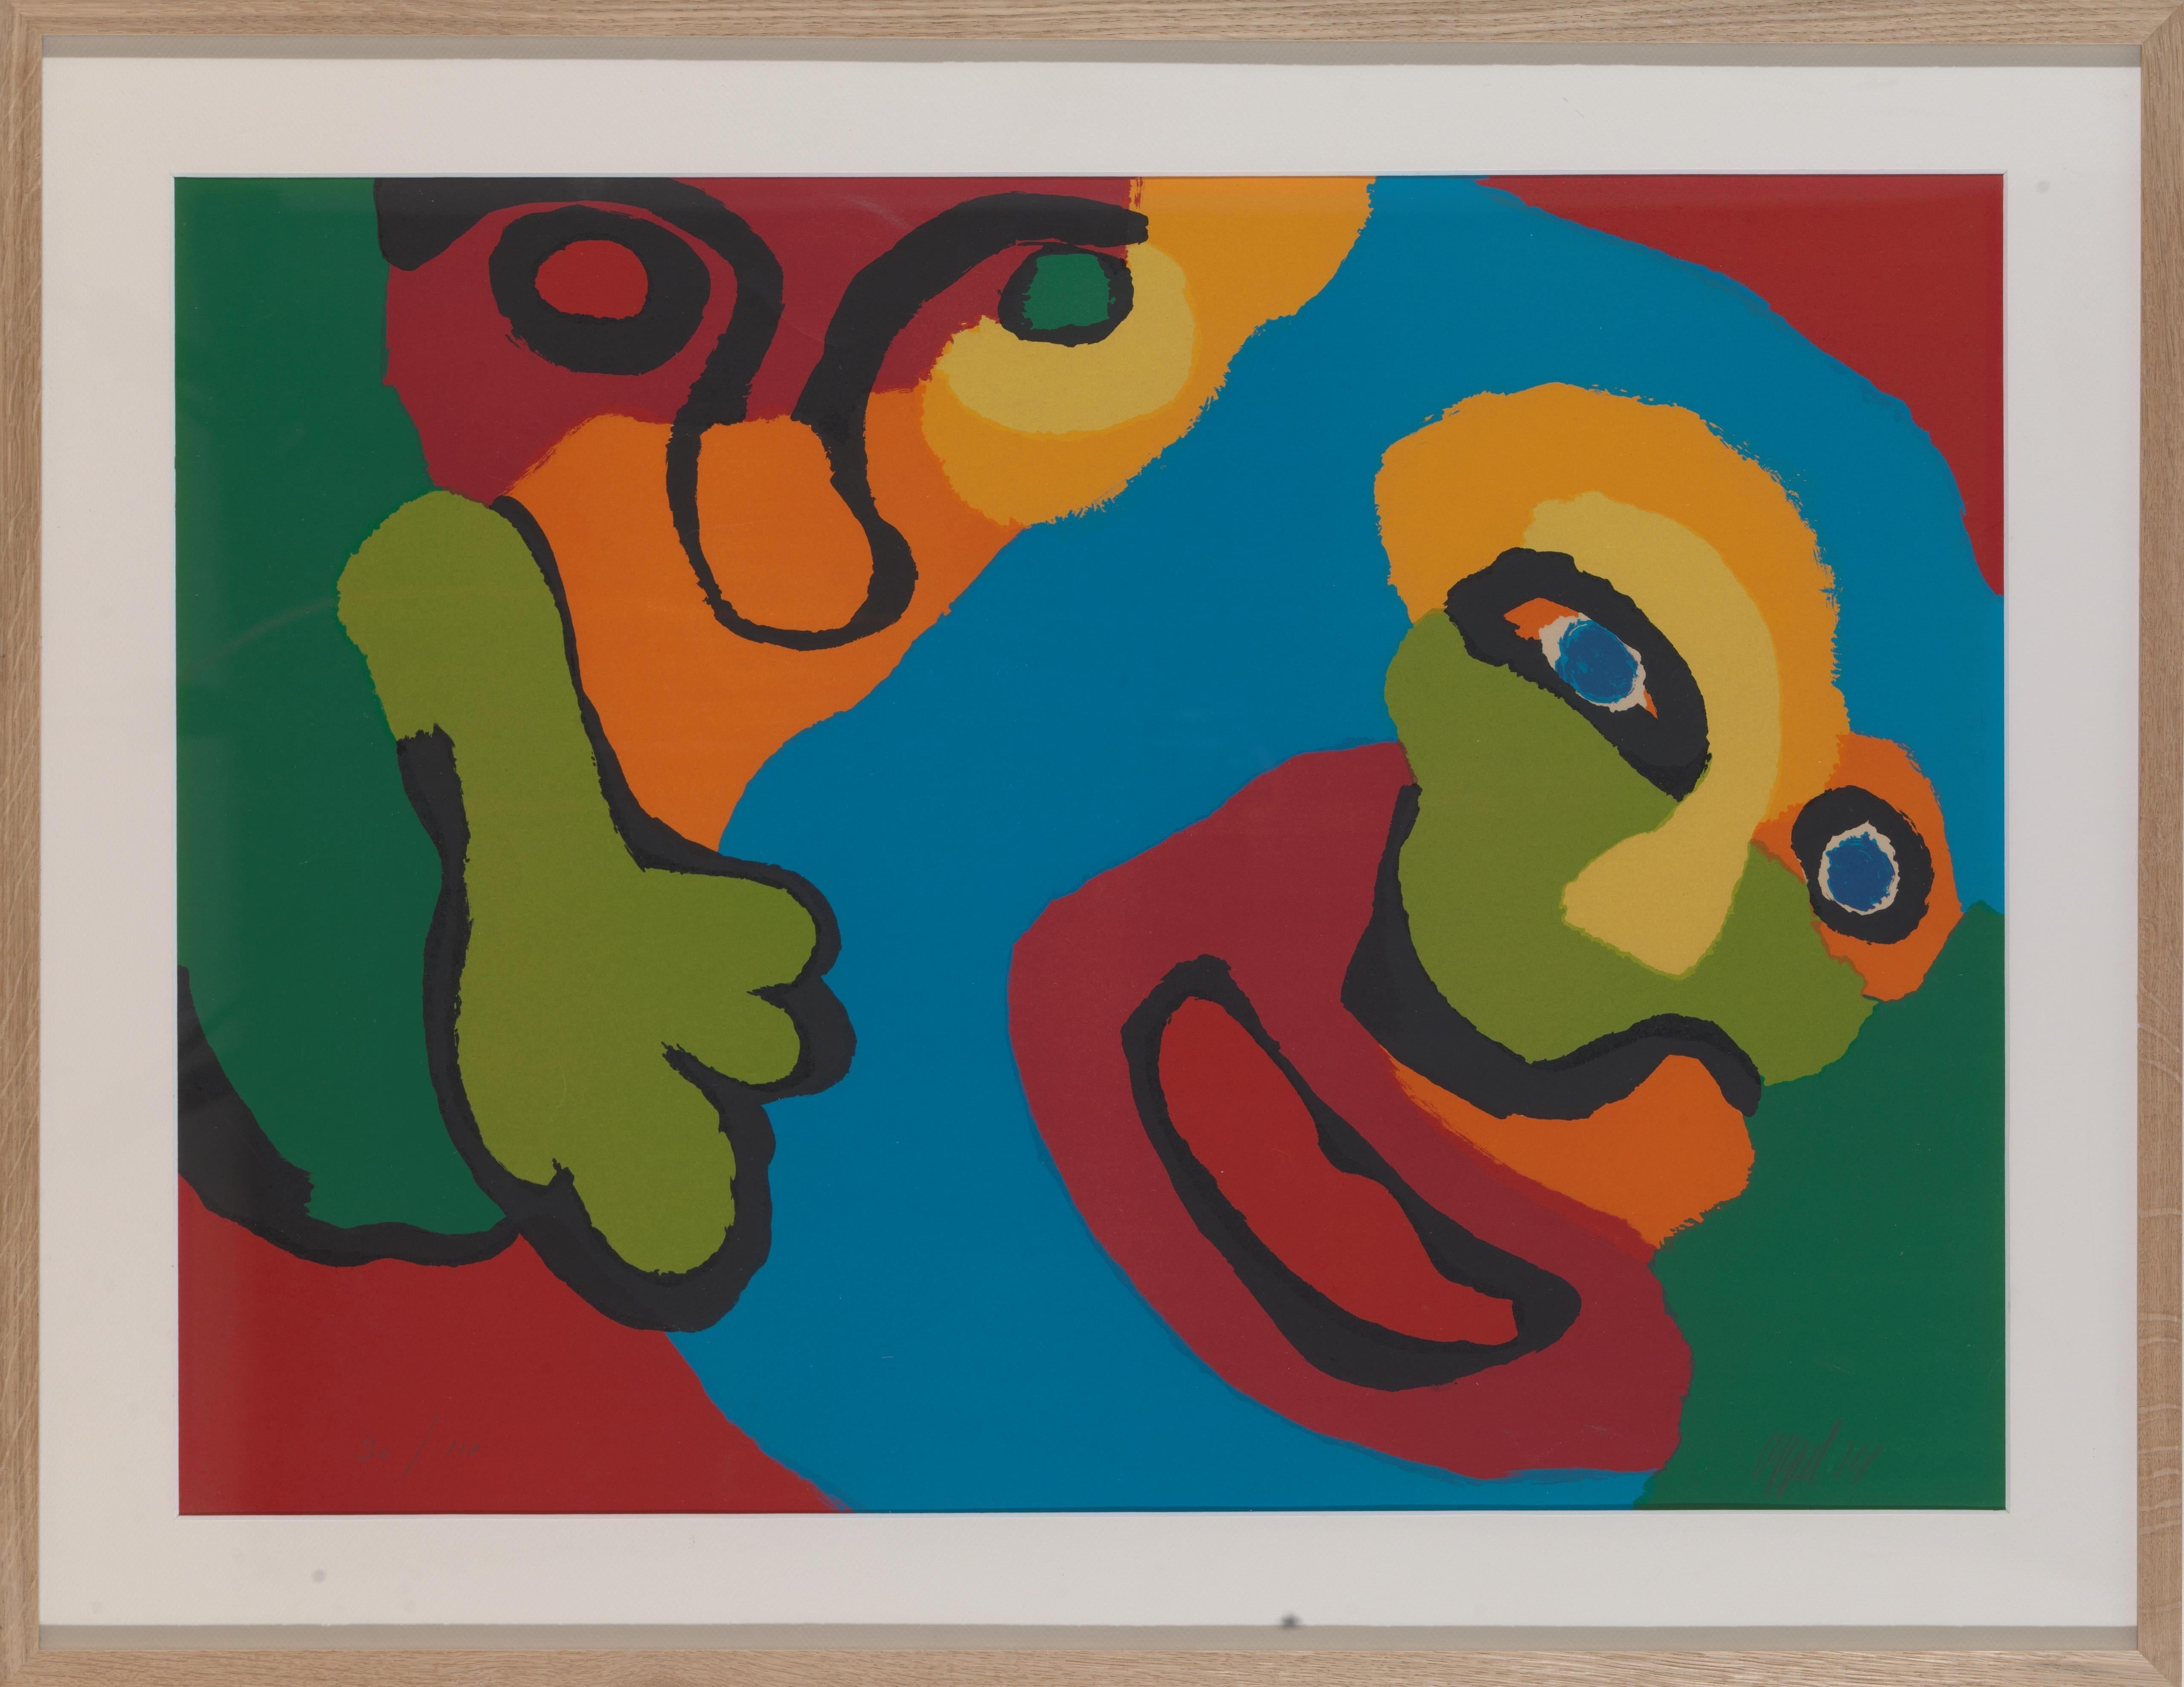 Lively screen print from 1974 by Artist Karel Appel (1921-2006): expressive and bold composition and colors. Pencil signed: 'Appel' and '74'. Dimensions are 75 x 55 cm.

In 1956 Appel summarized the genesis of his work: 